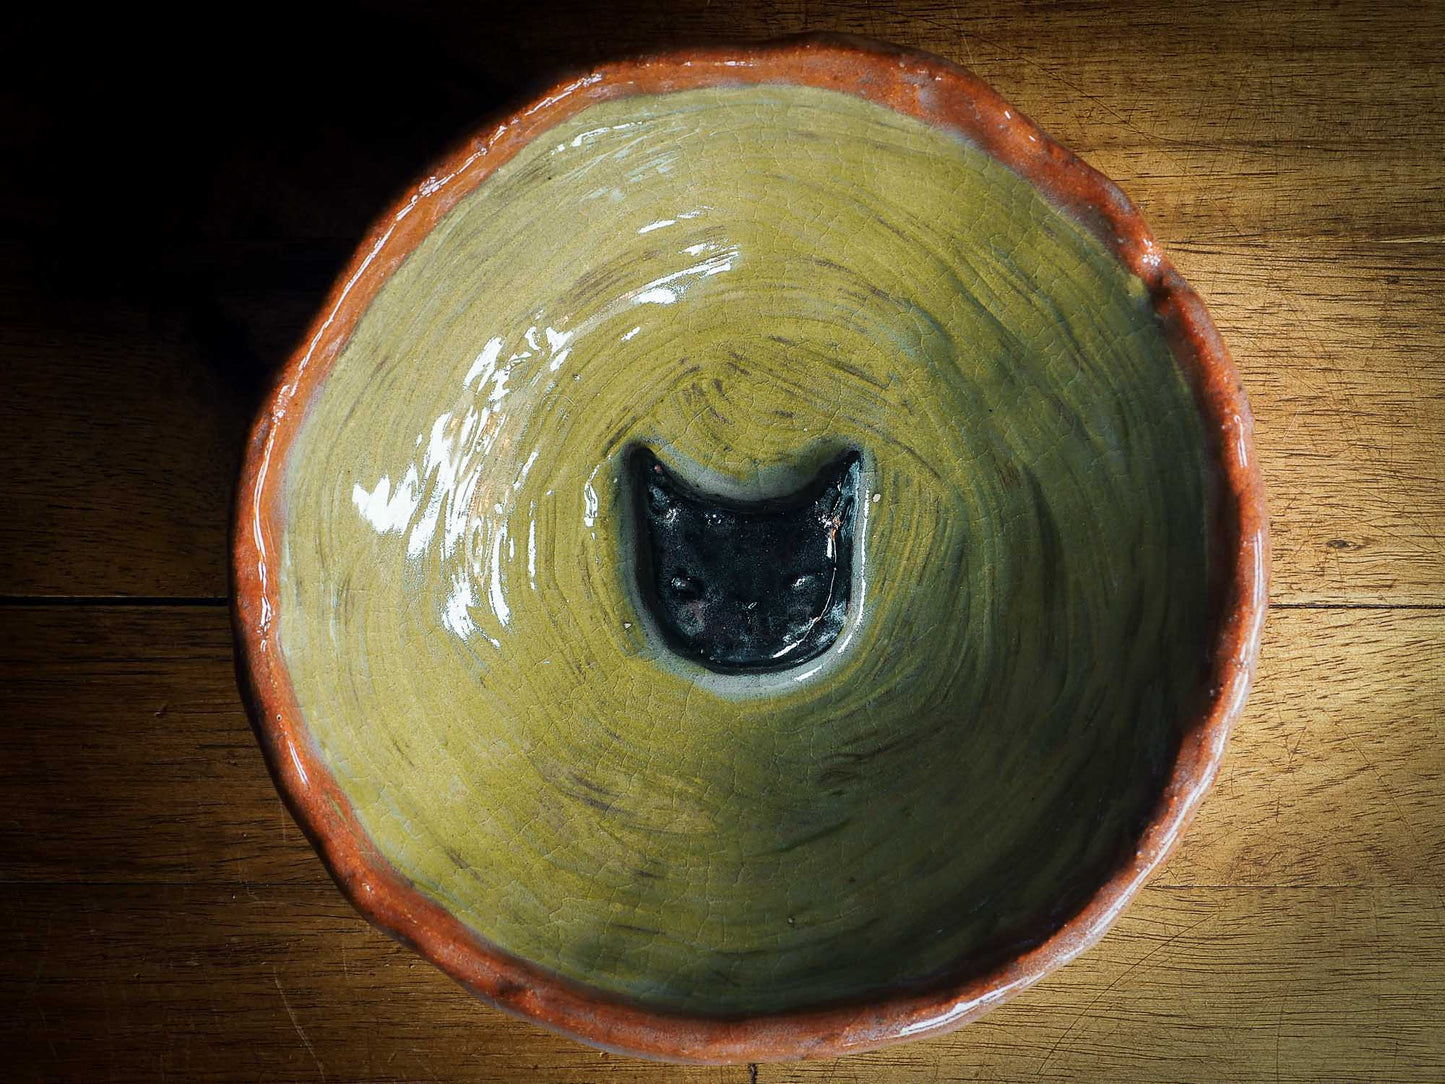 An original Idania Salcido Danita Art pinched ceramic white cat pet food bowl. Handmade from locally foraged clay, this glazed ceramics one of a kind artwork is perfect for any kitchen plate and bowls unique collection. A hand made black cat waits for you at the bottom of this brown and green striped pet food bowl.